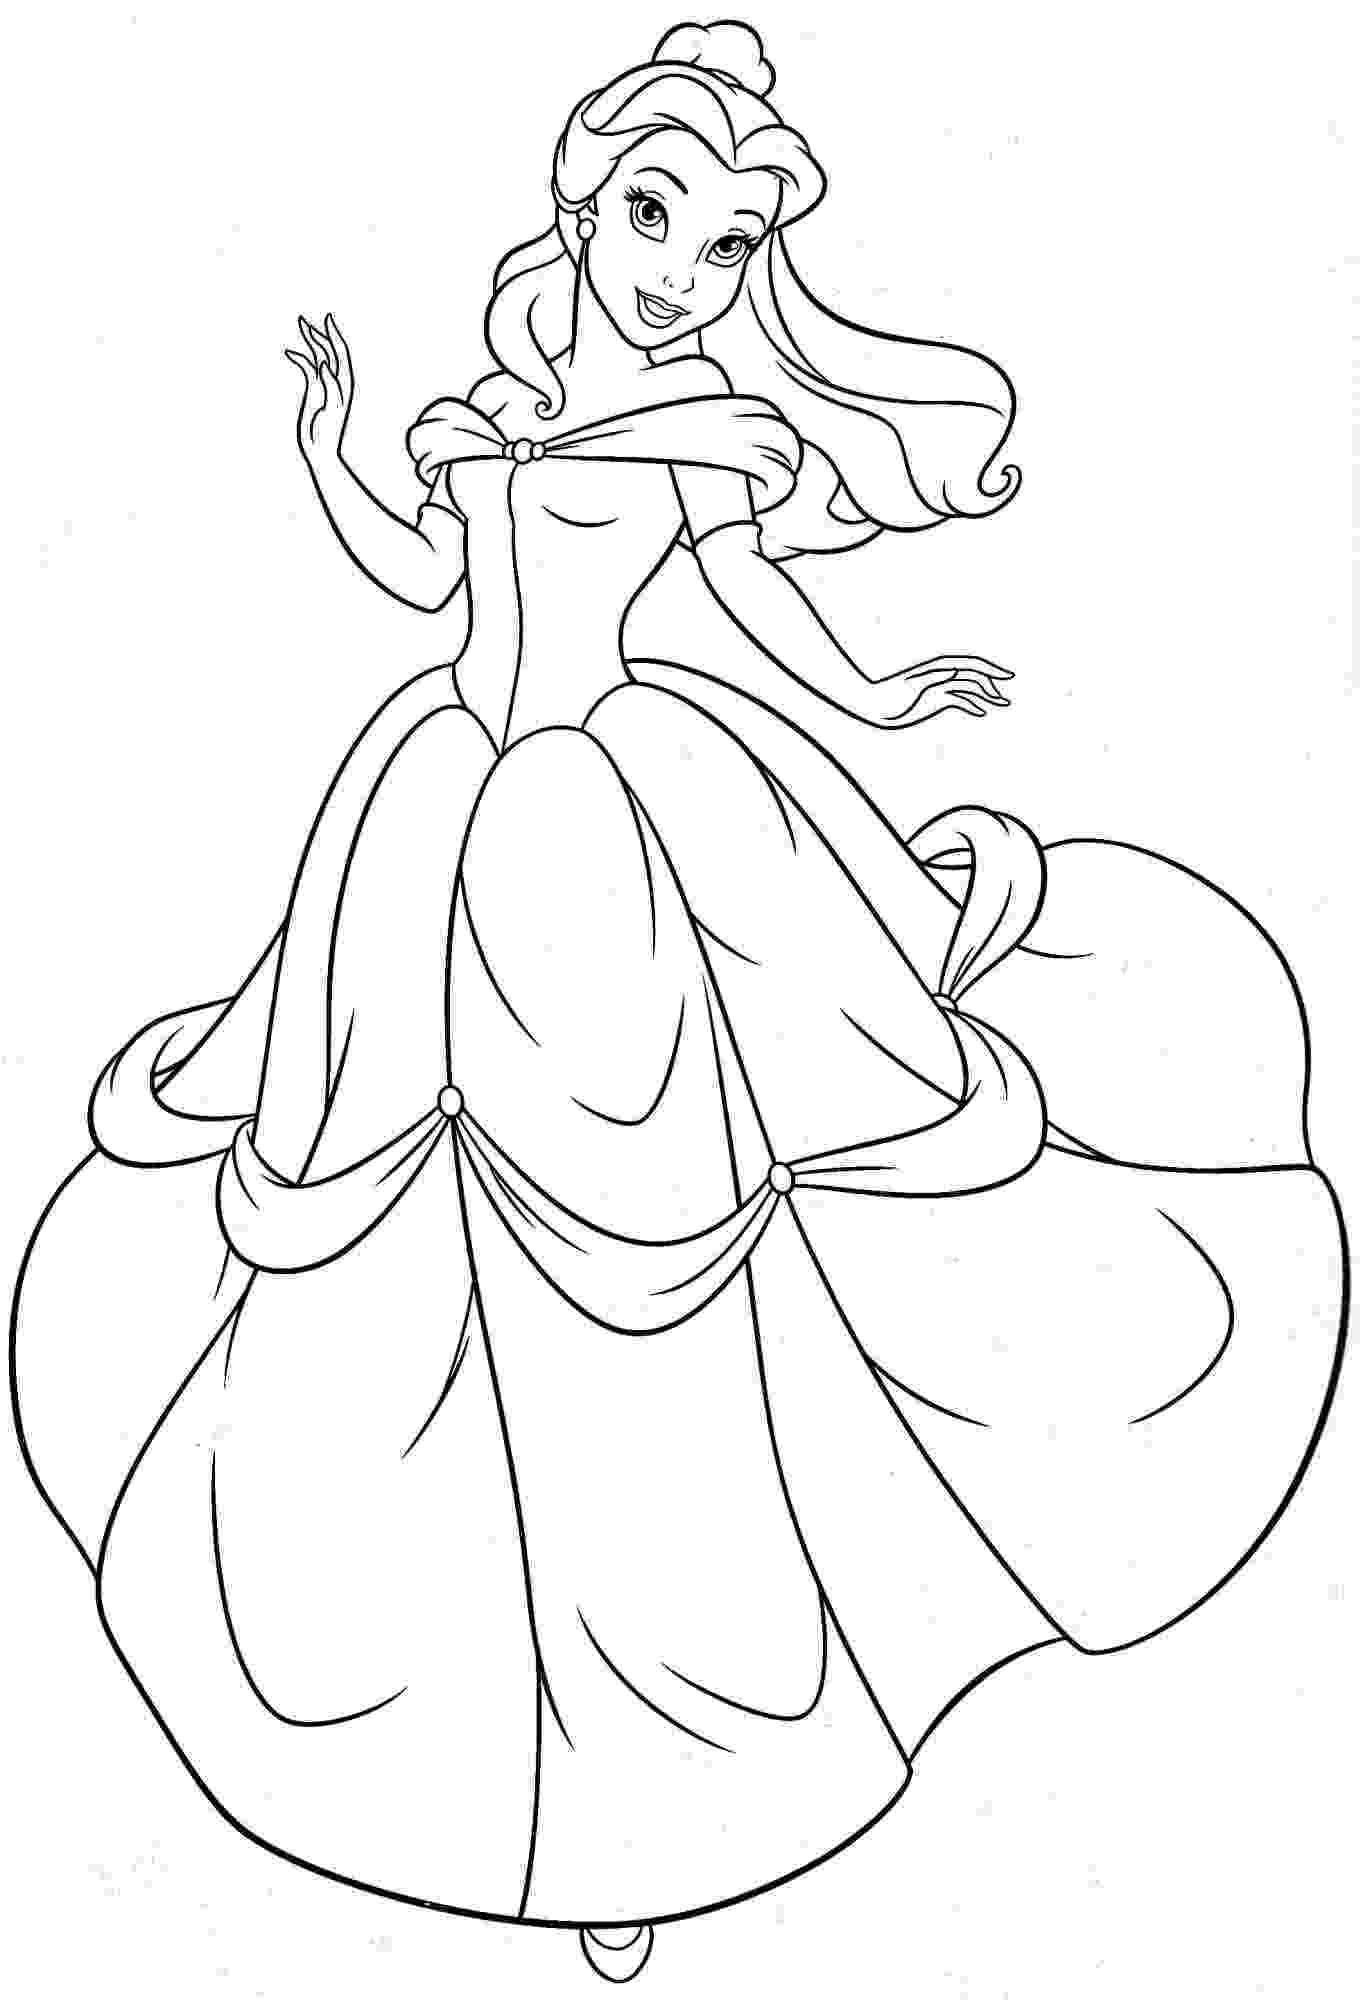 printable coloring pages for disney princess princess coloring pages best coloring pages for kids disney princess coloring for pages printable 